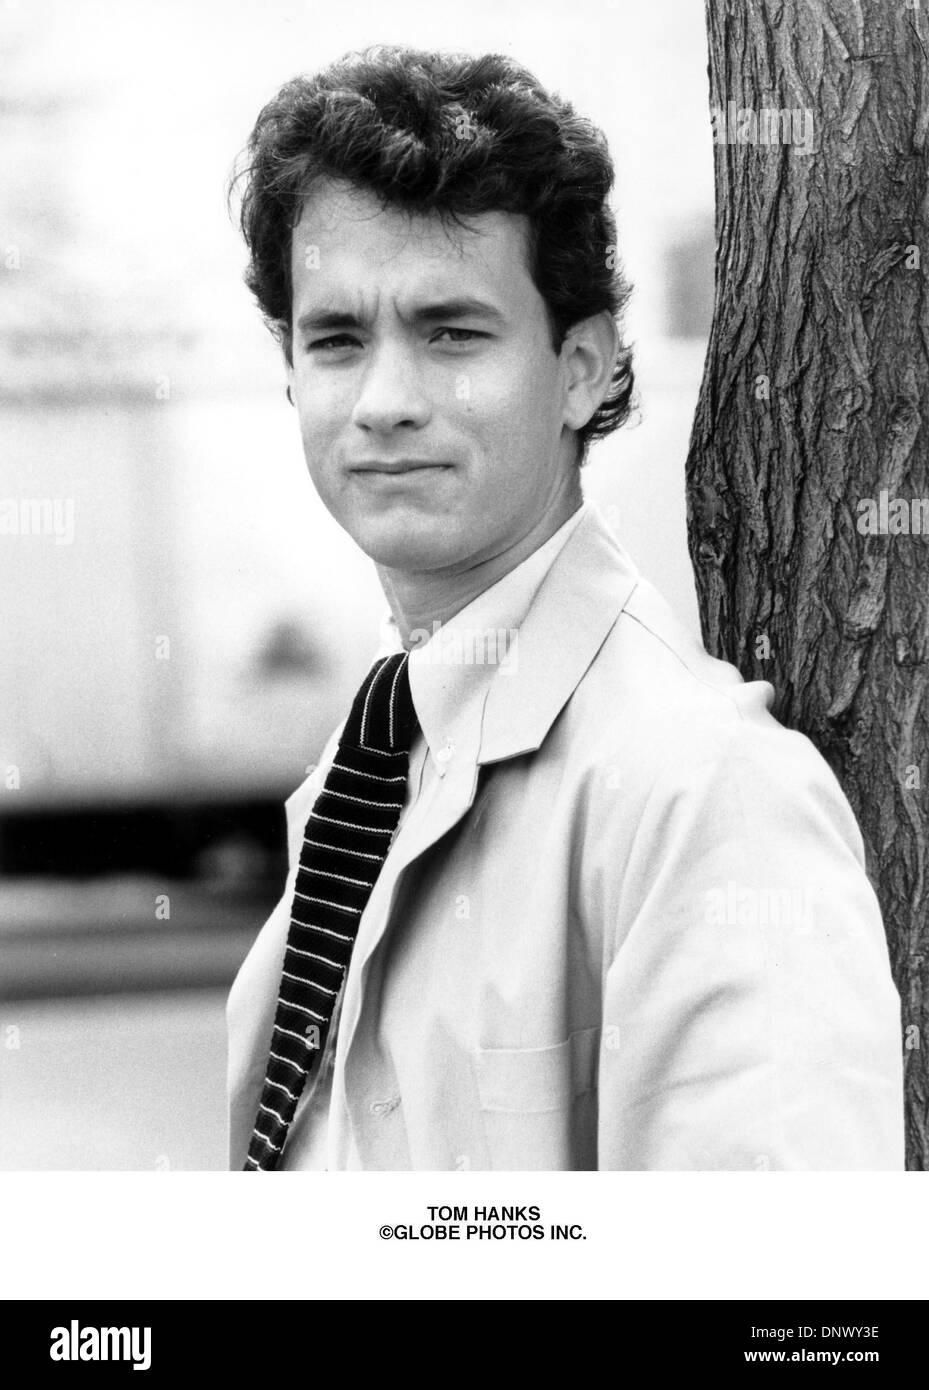 Tom hanks Black and White Stock Photos & Images - Alamy